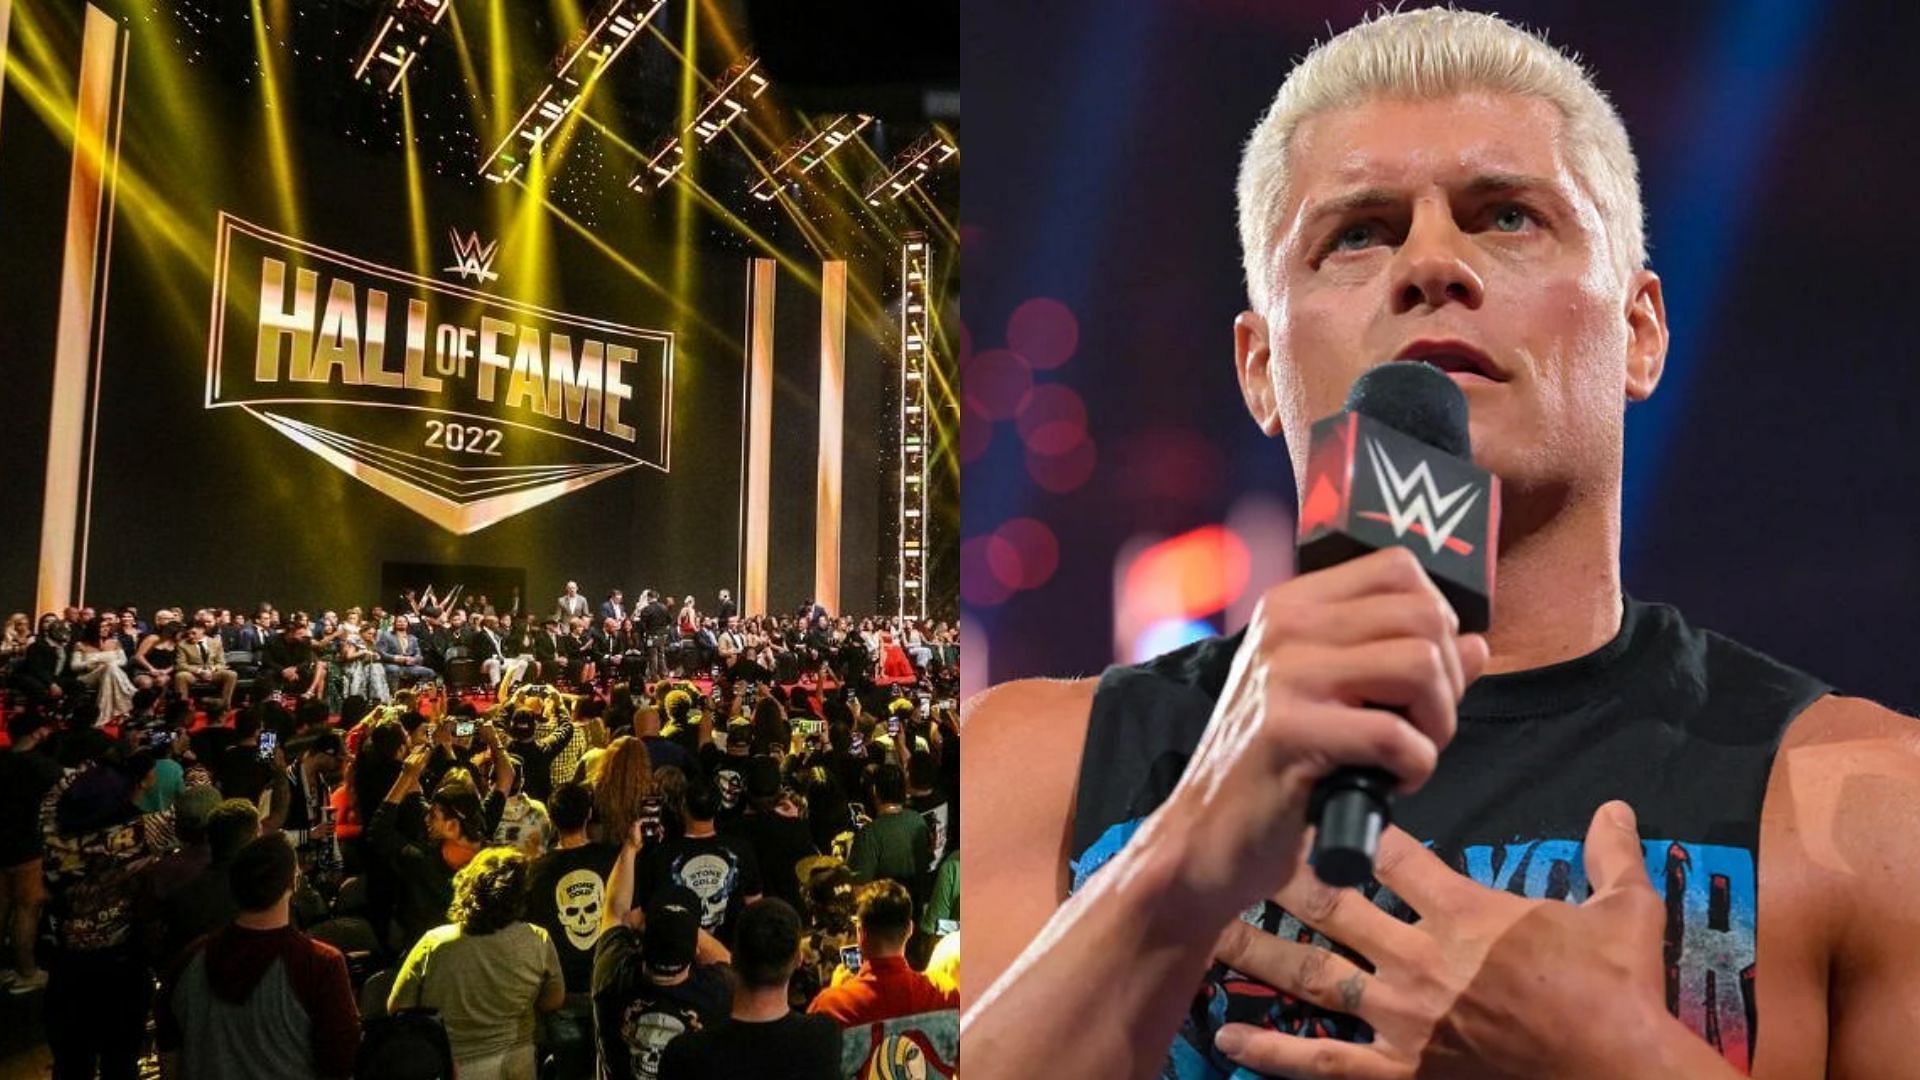 Cody Rhodes is currently signed to WWE